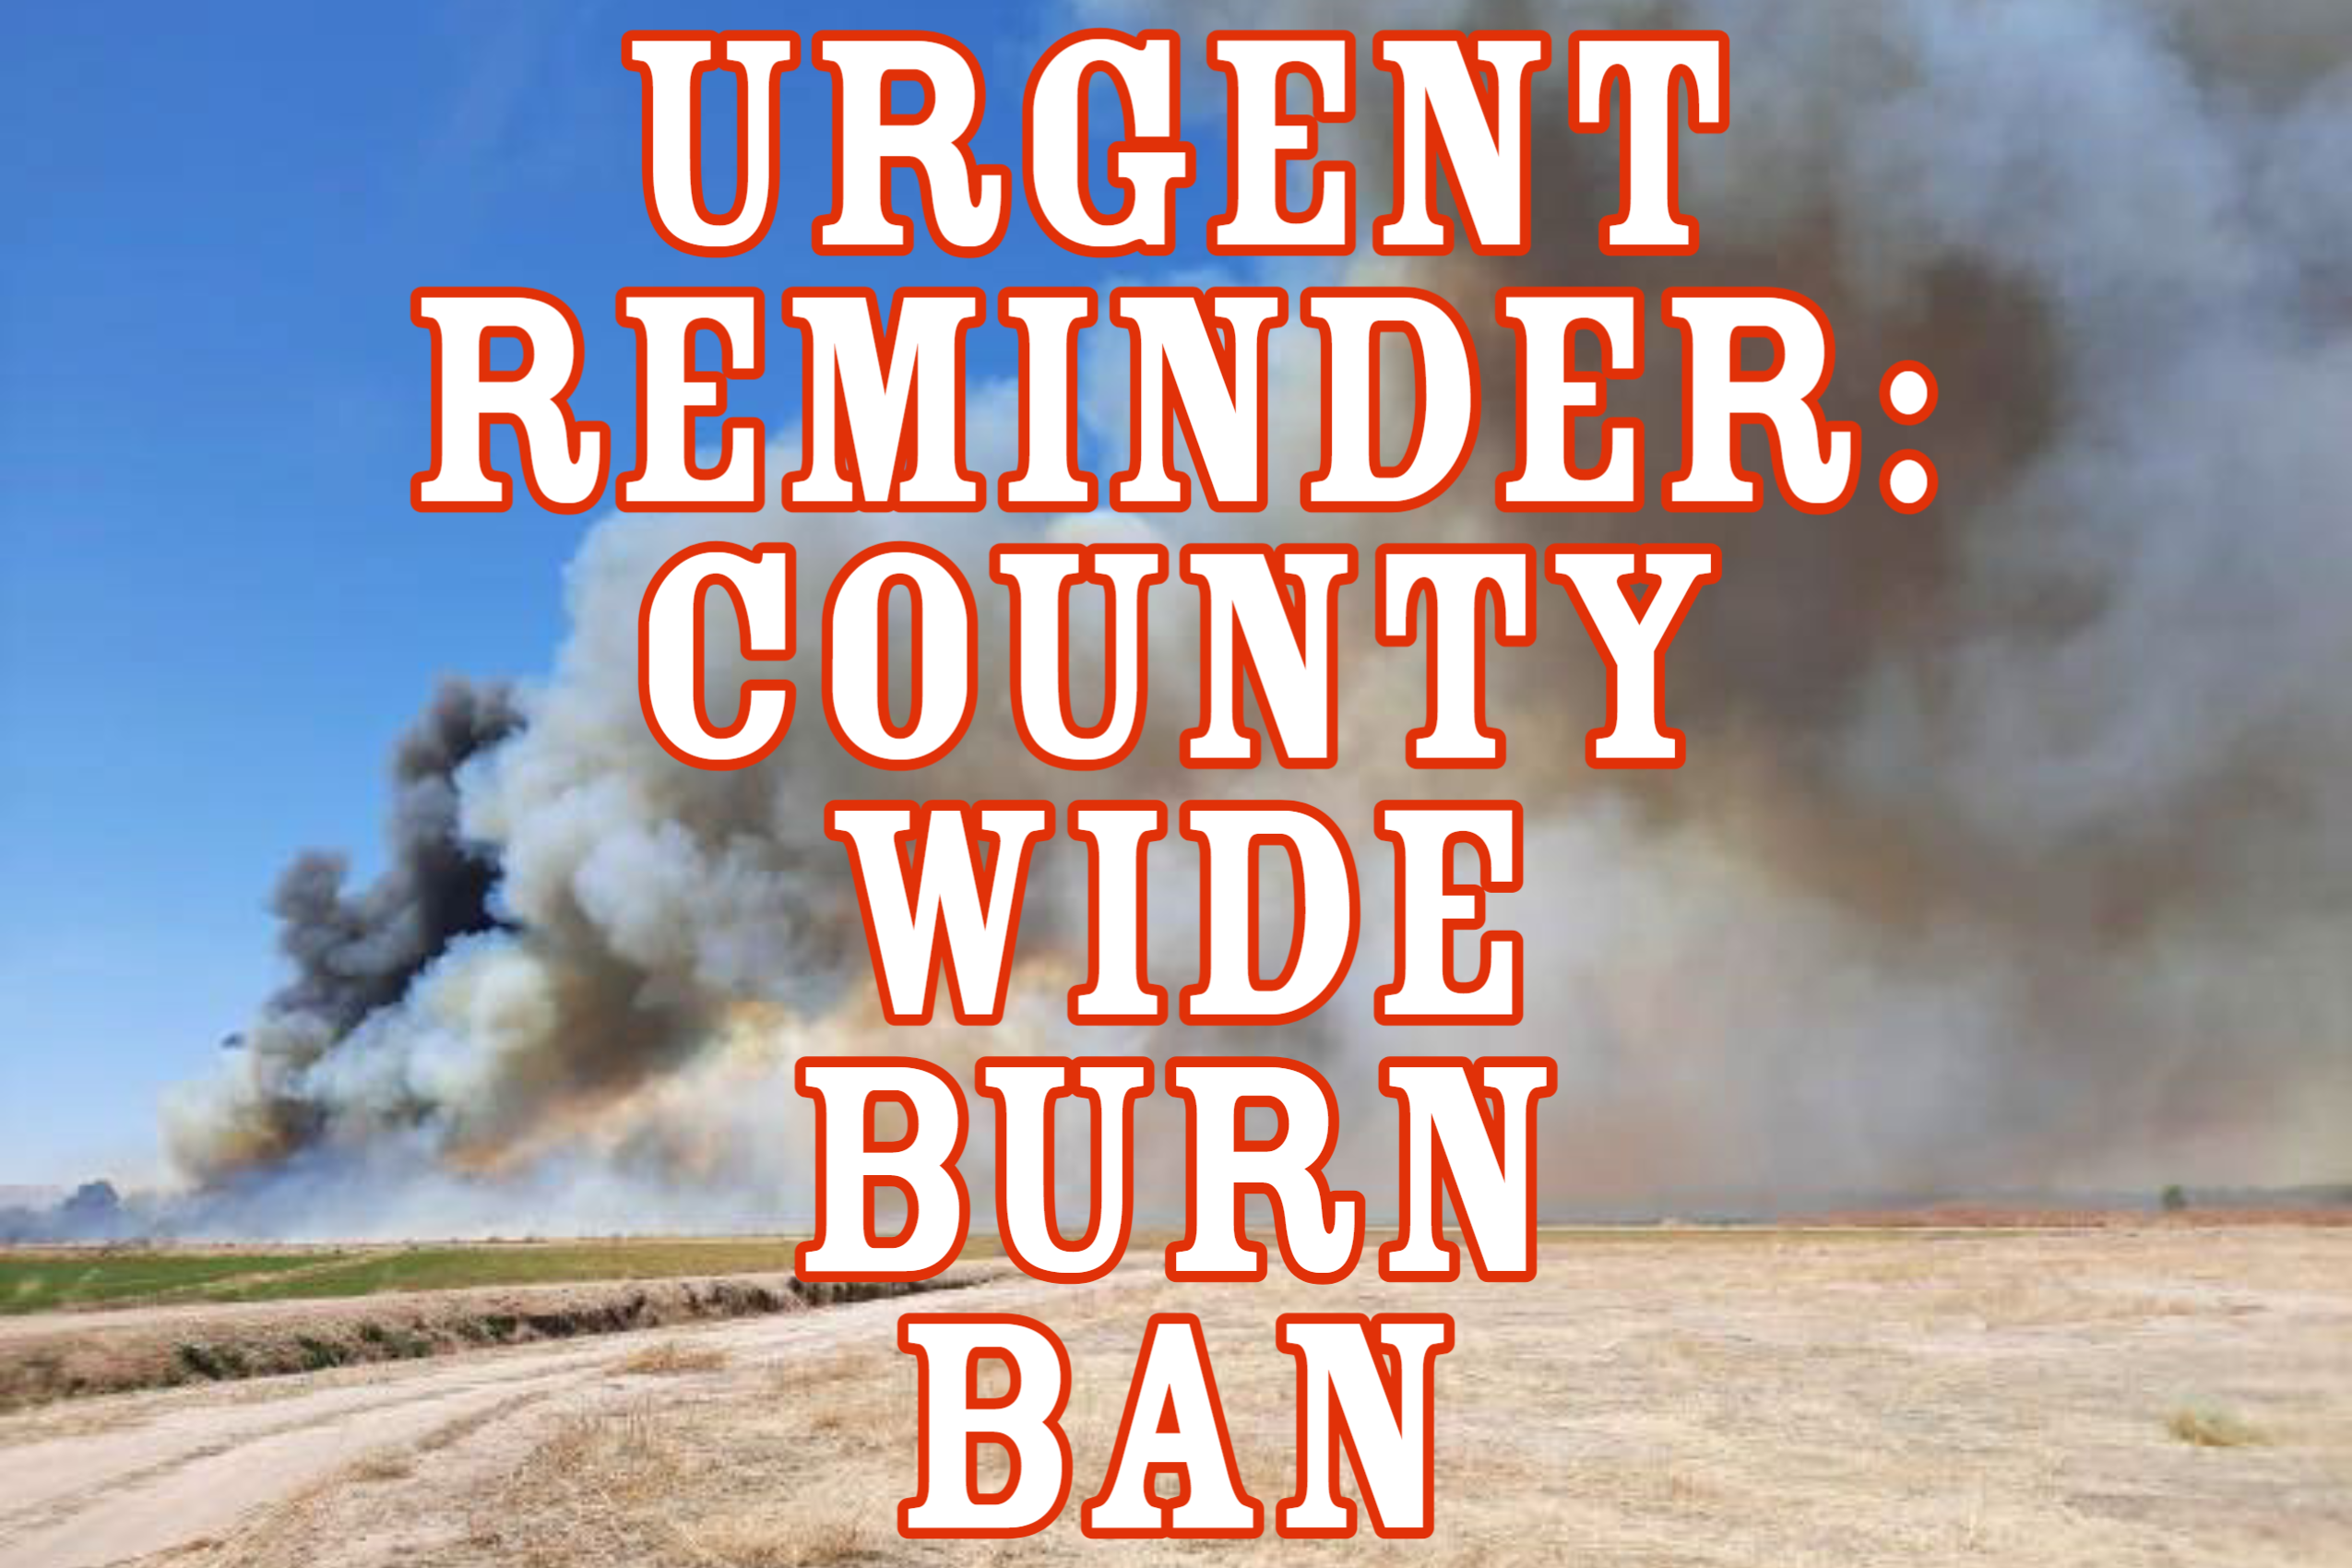 Featured image for “Urgent Reminder: County Wide Burn Ban”